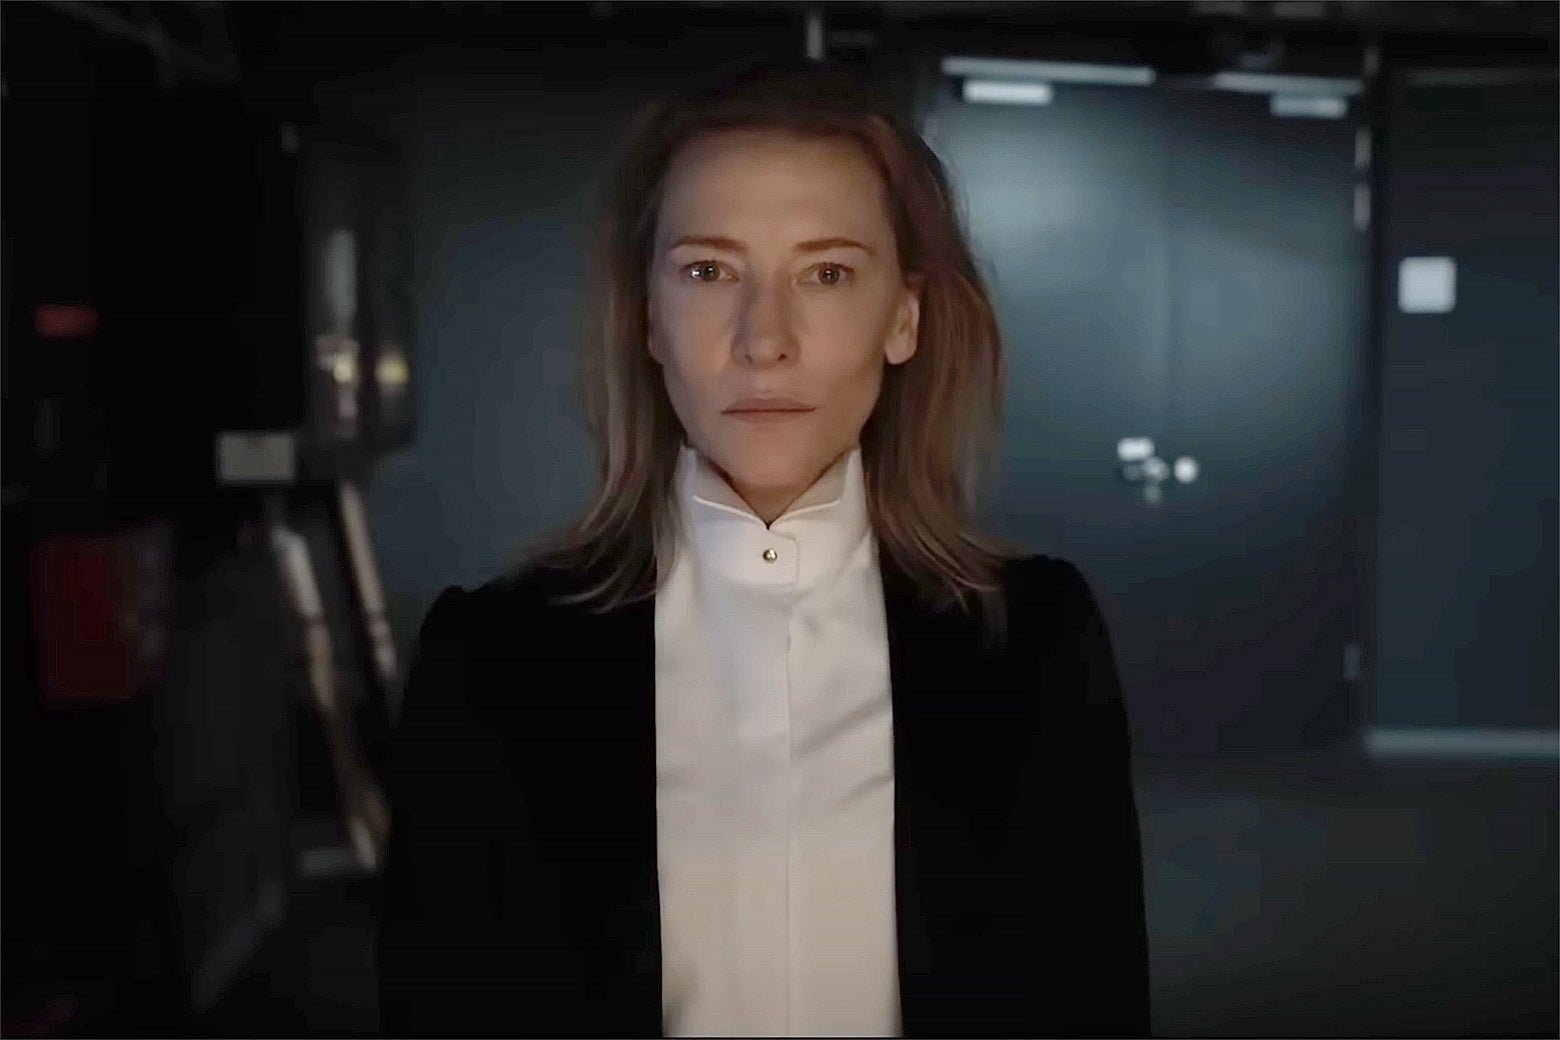 Cate Blanchett, as Lydia Tár, wears a conductor's suit and stares into the camera.